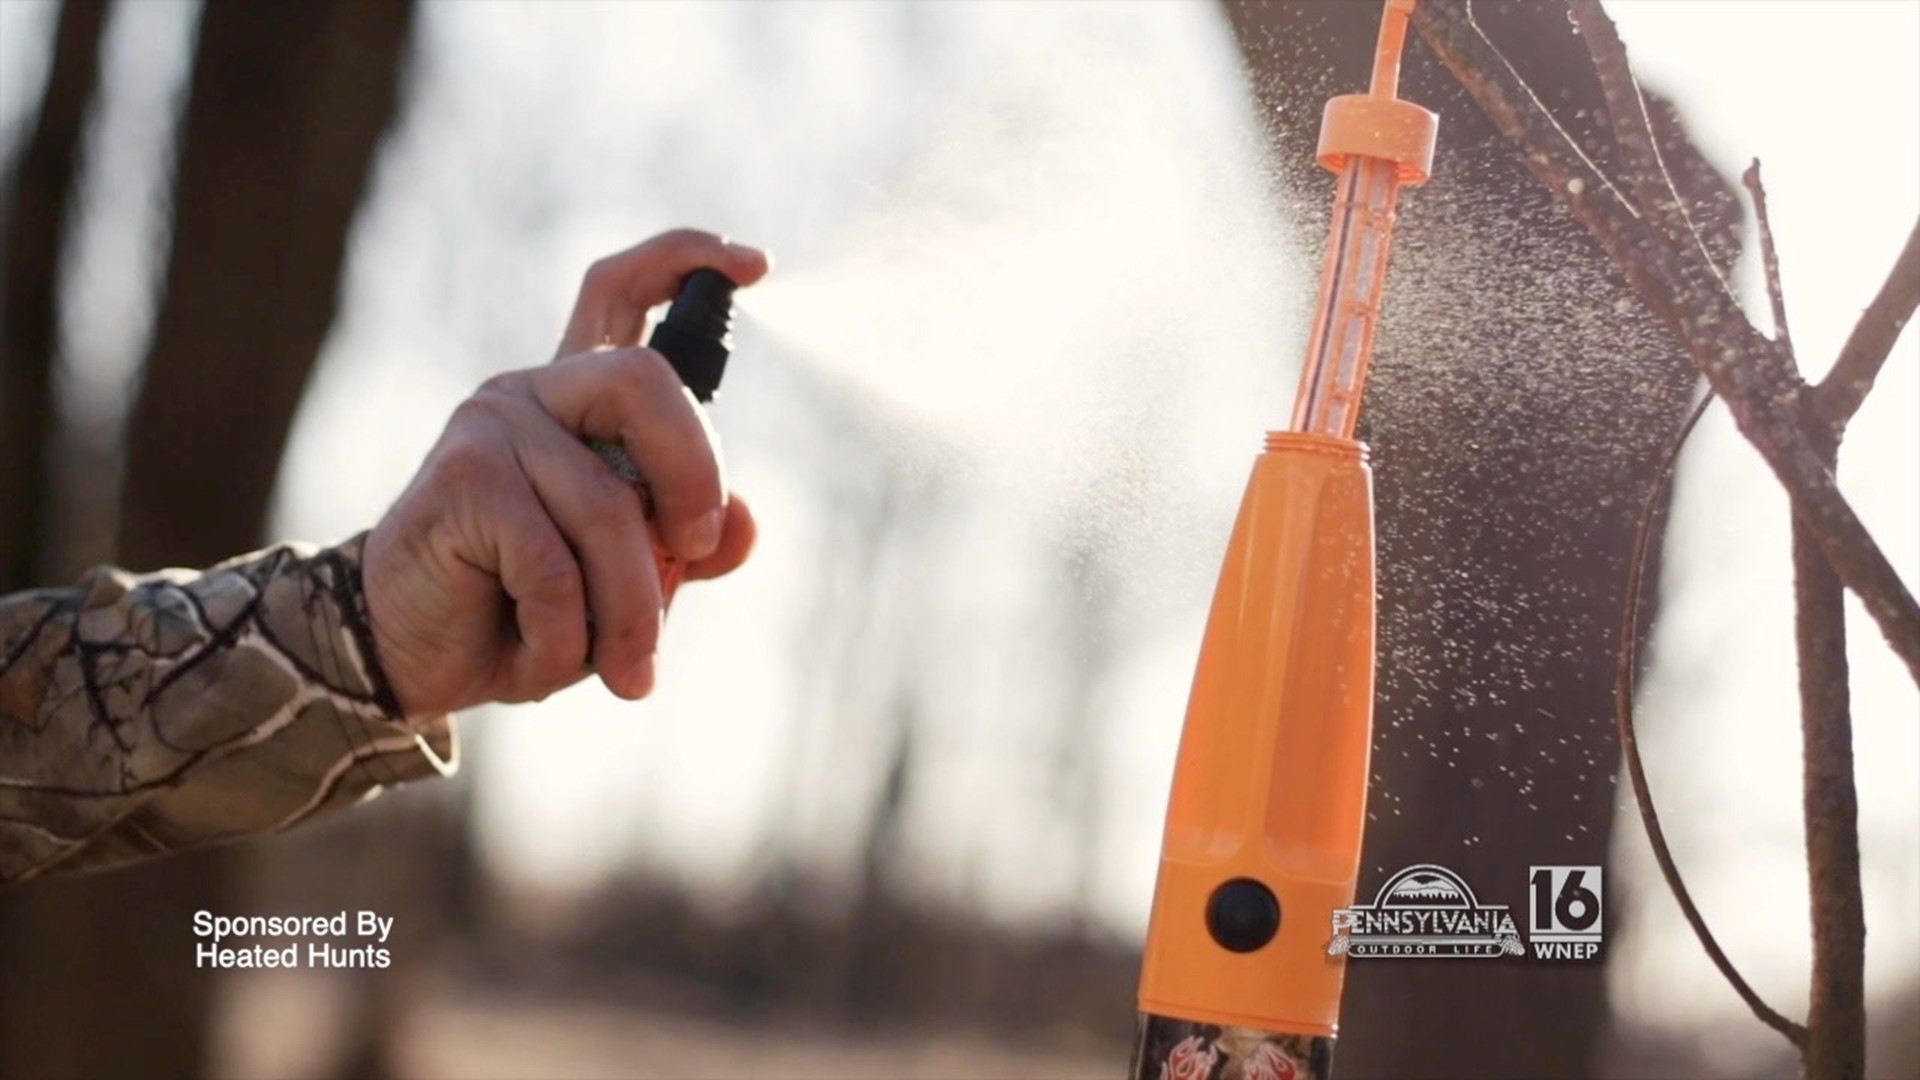 Up your hunting game with Heated Hunts.